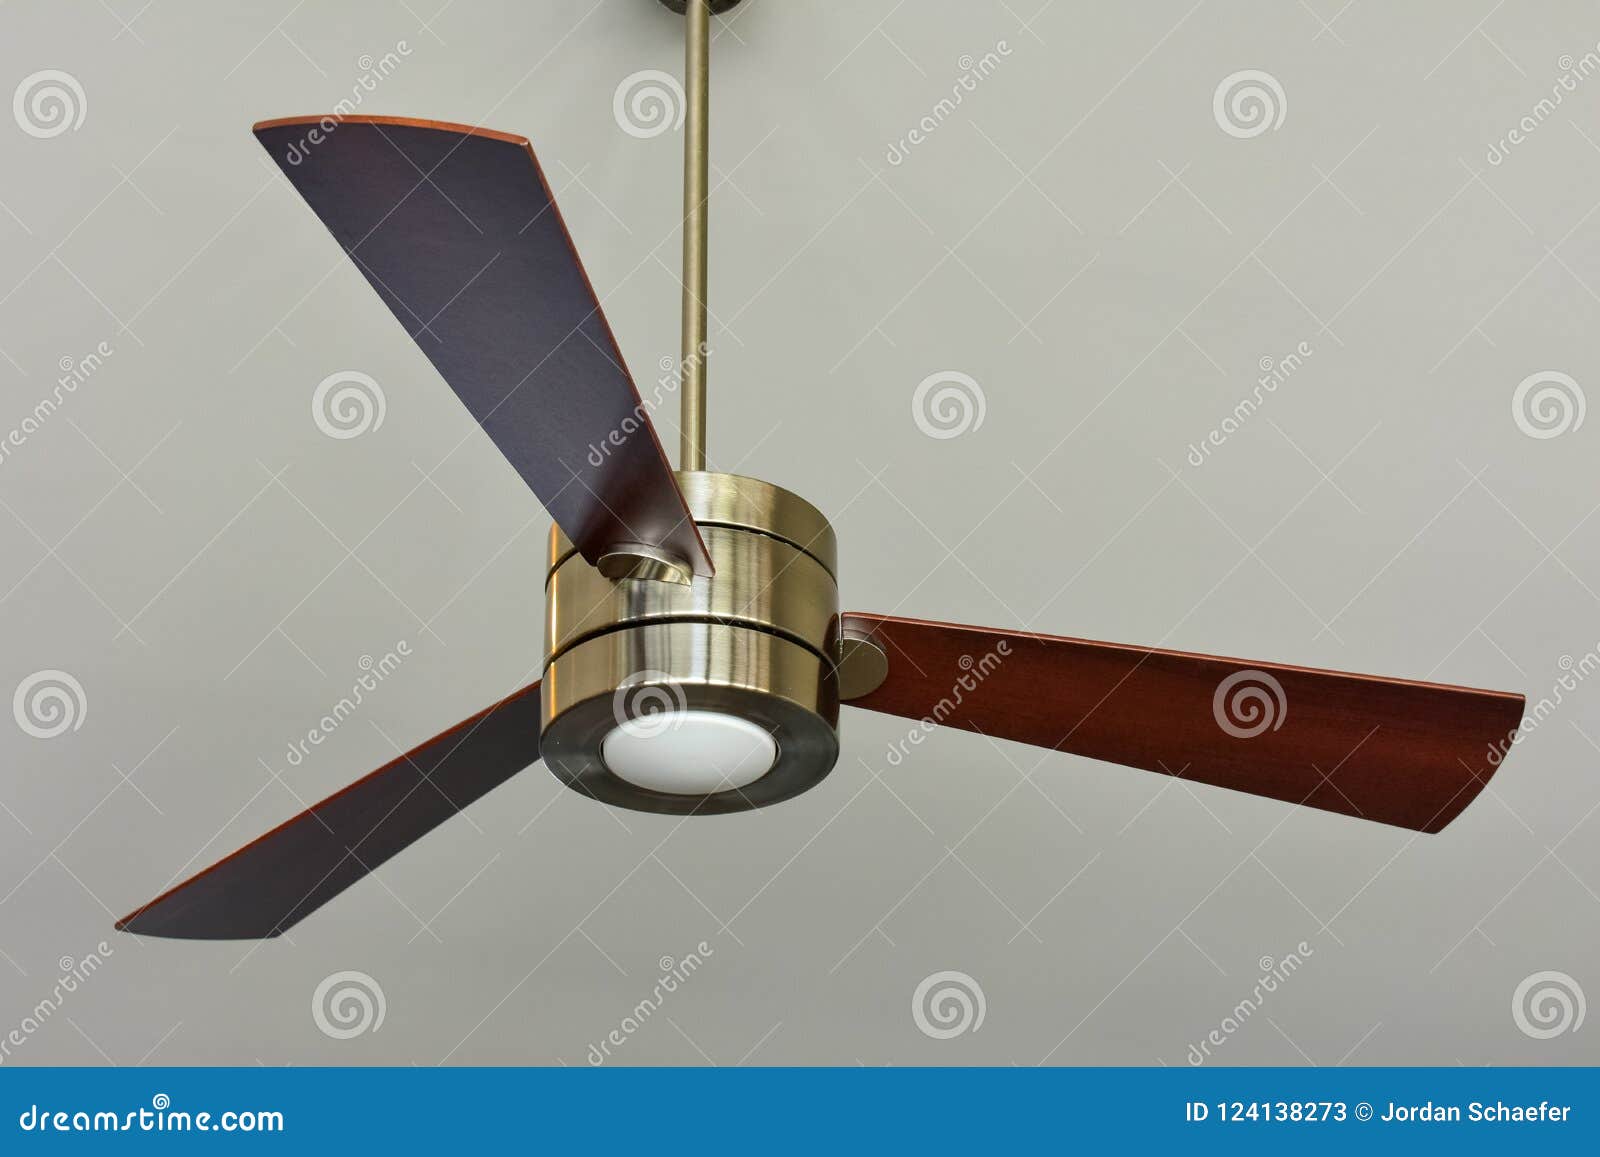 Ceiling Fan Inside Of Home Stock Image Image Of Silver 124138273